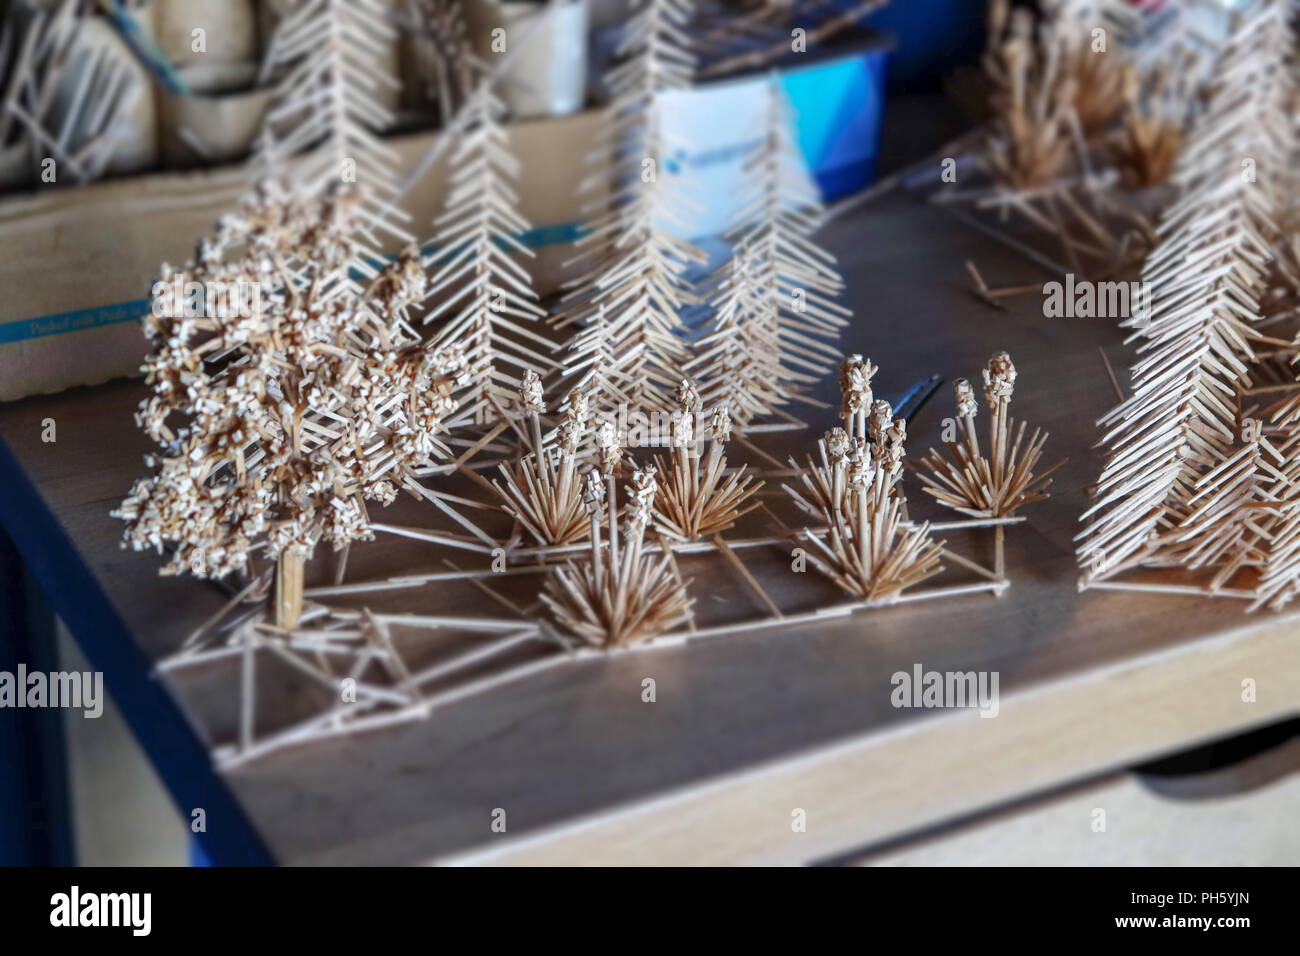 Toothpick art with miniatures trees Stock Photo